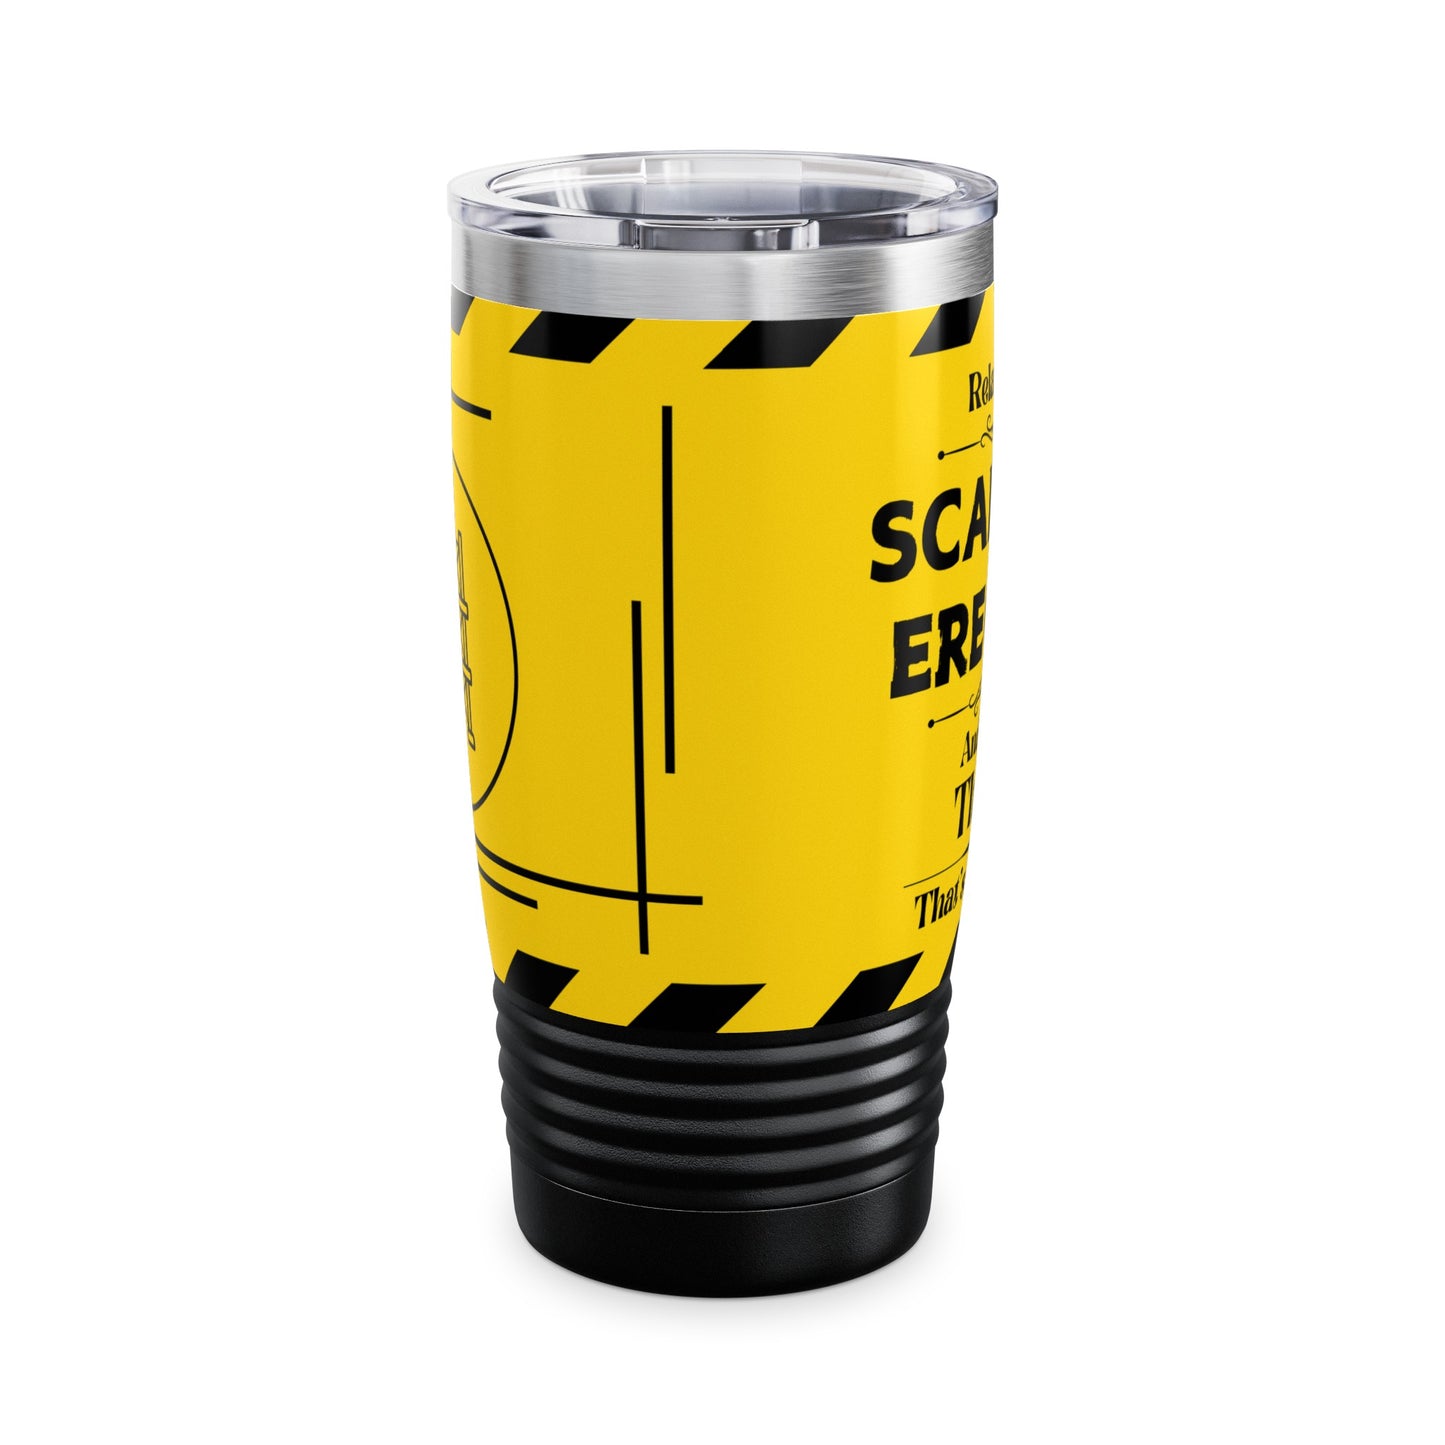 Relax, I'm A Scaffold Erector, And I Know Things - Ringneck Tumbler, 20oz